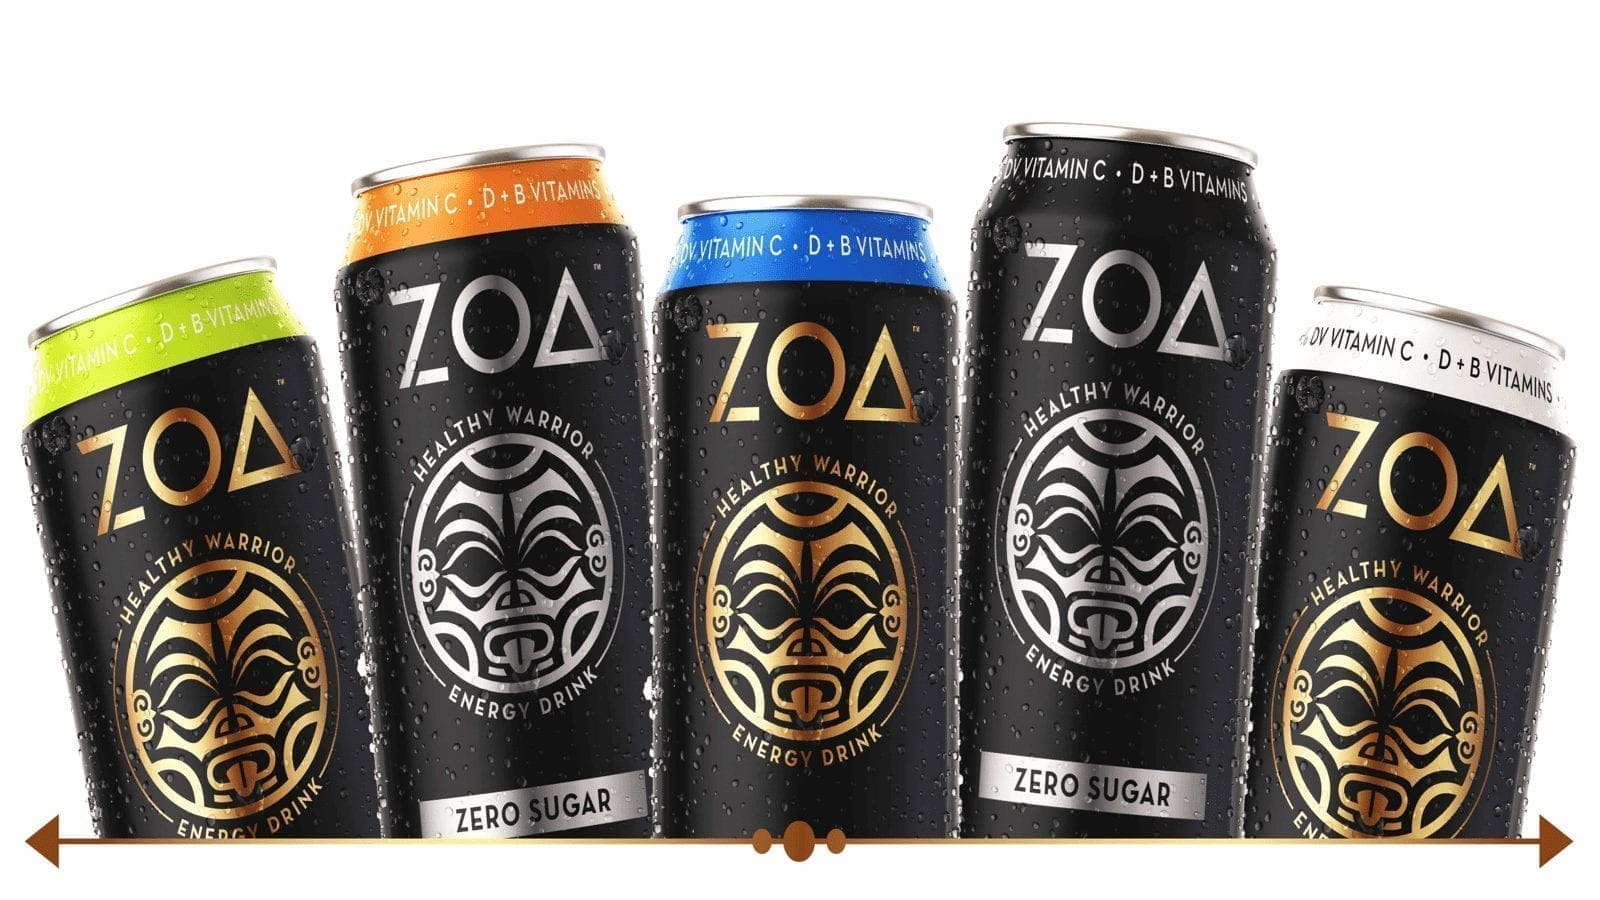 Molson Coors to distribute ZOA, a new energy drink co-founded by Hollywood actor Dwayne Johnson